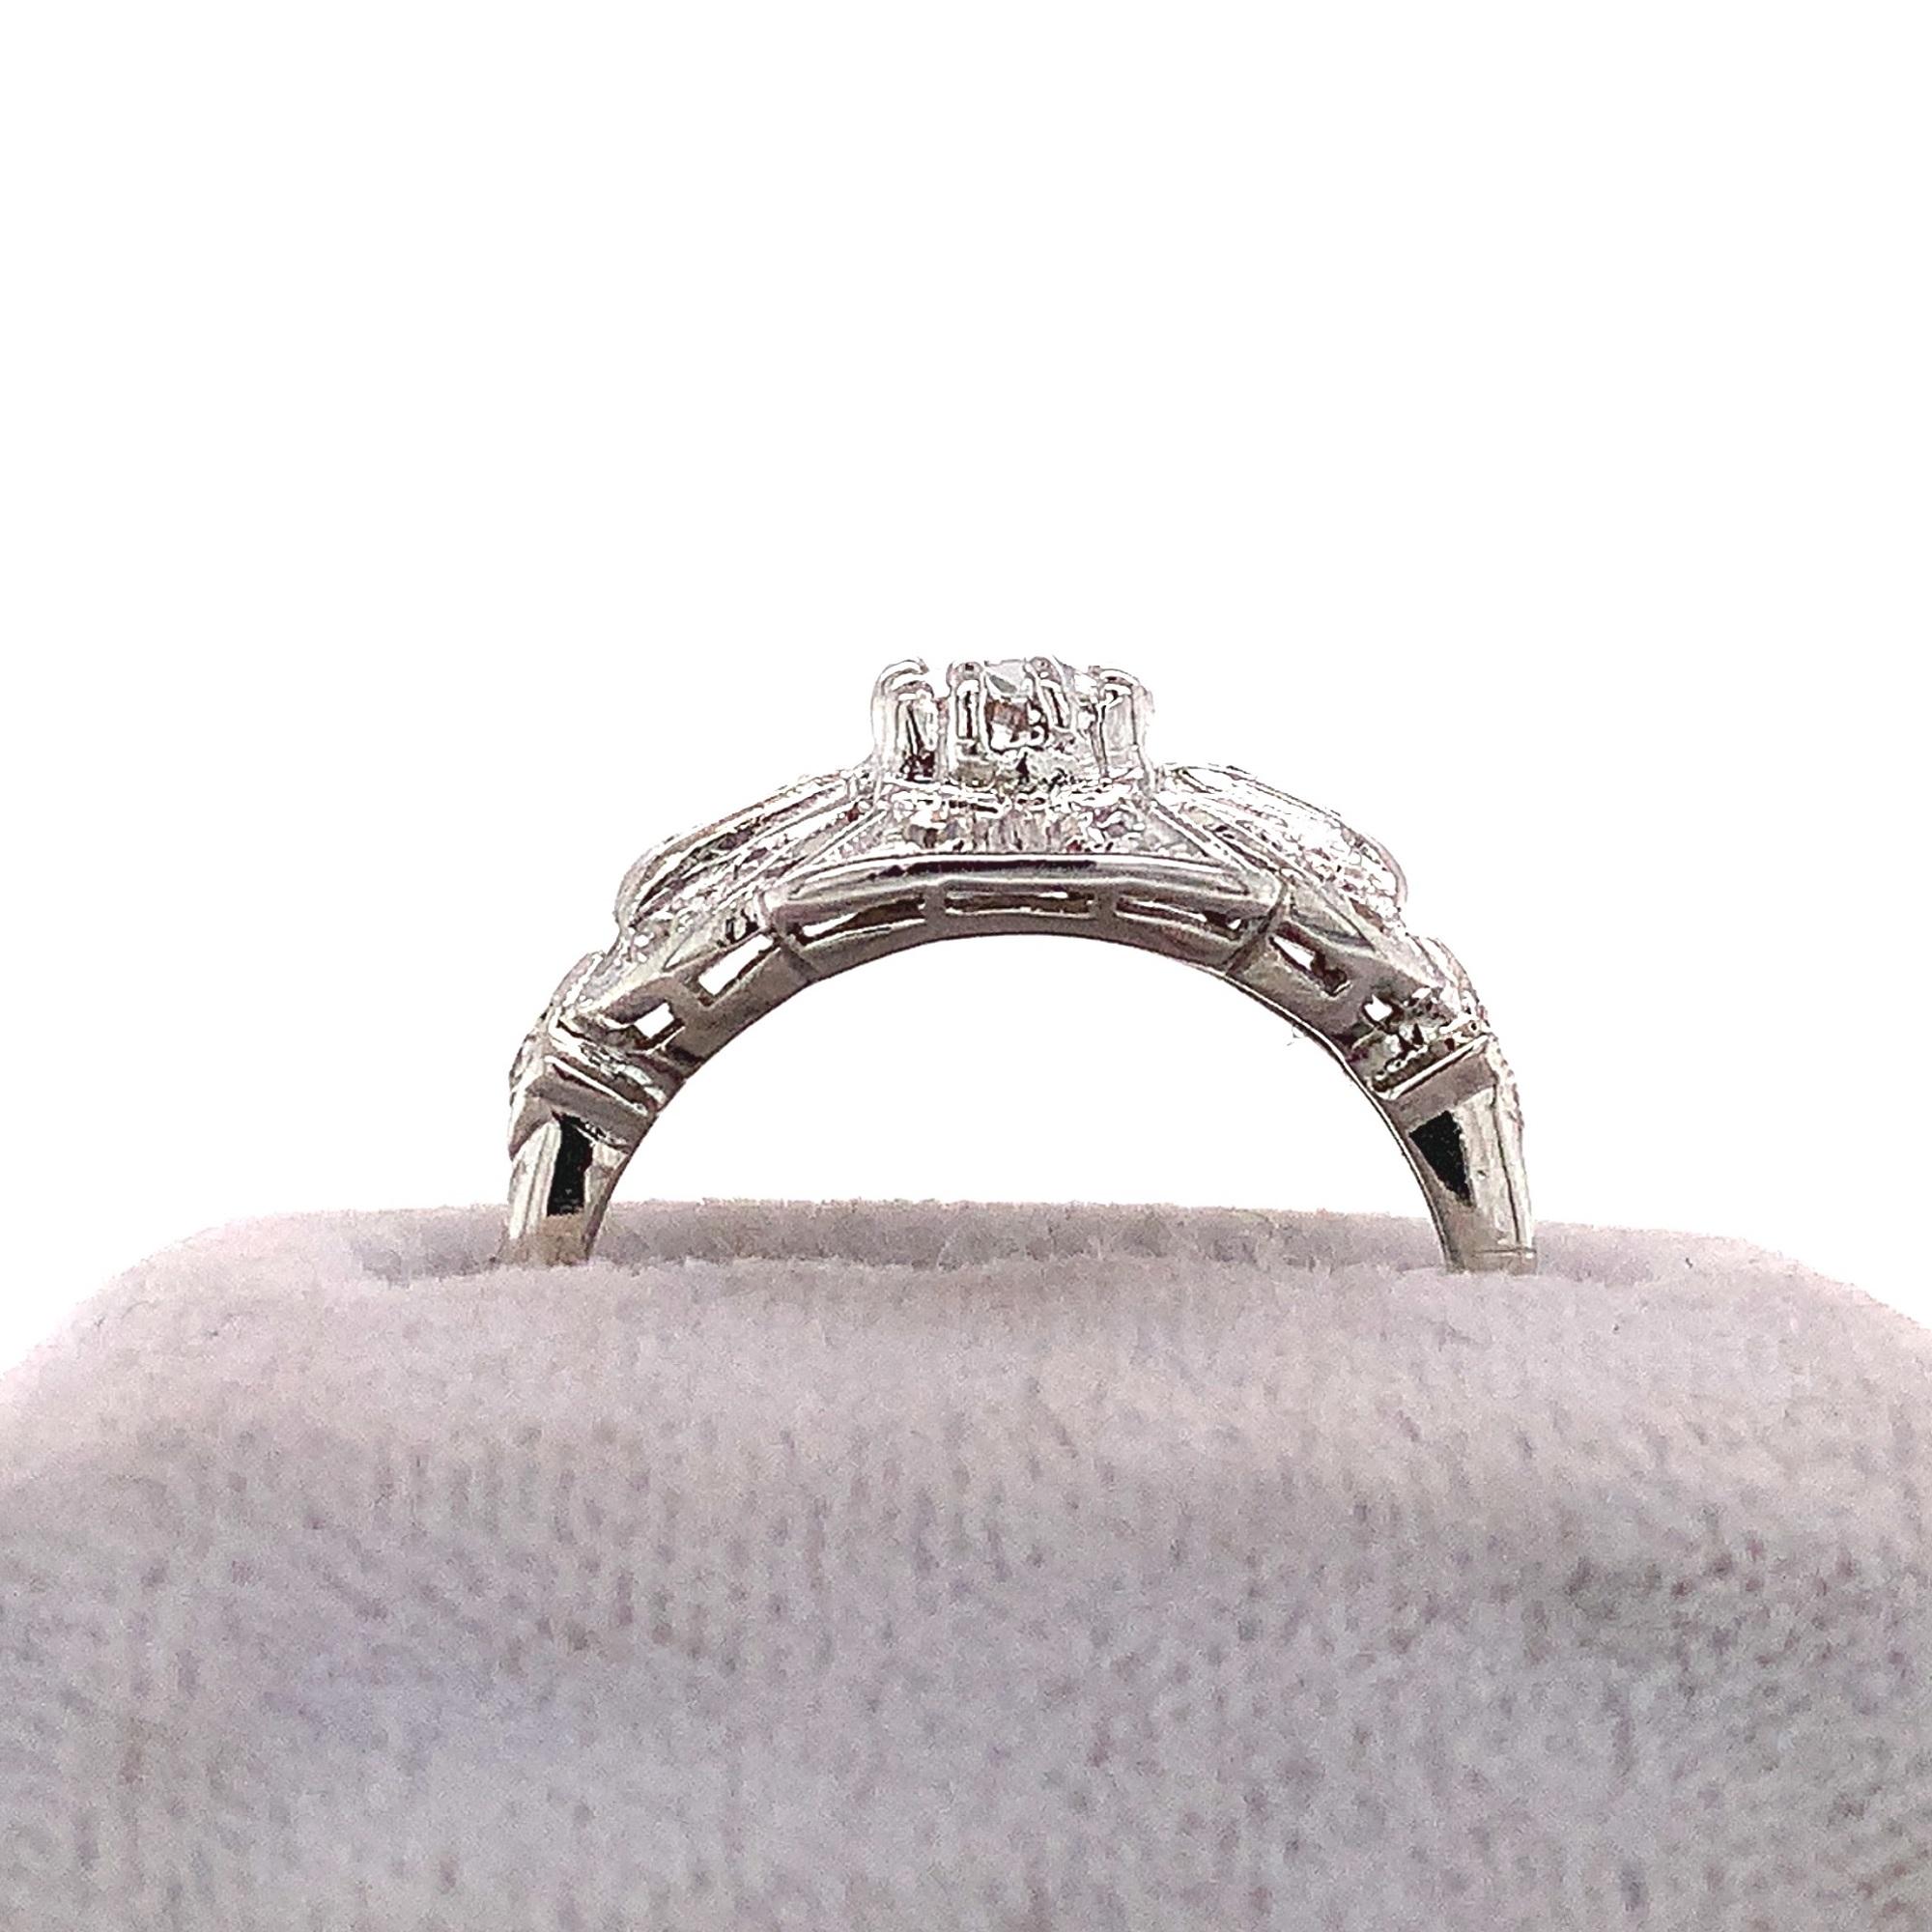 Platinum diamond ring featuring an European cut center diamond measuring about 4.7mm and weighing about 1/3ct. There are 12 round diamond accents measuring 1.3mm to 1.5mm and 2 diamond baguettes weighing about .17cts total. The diamonds have SI